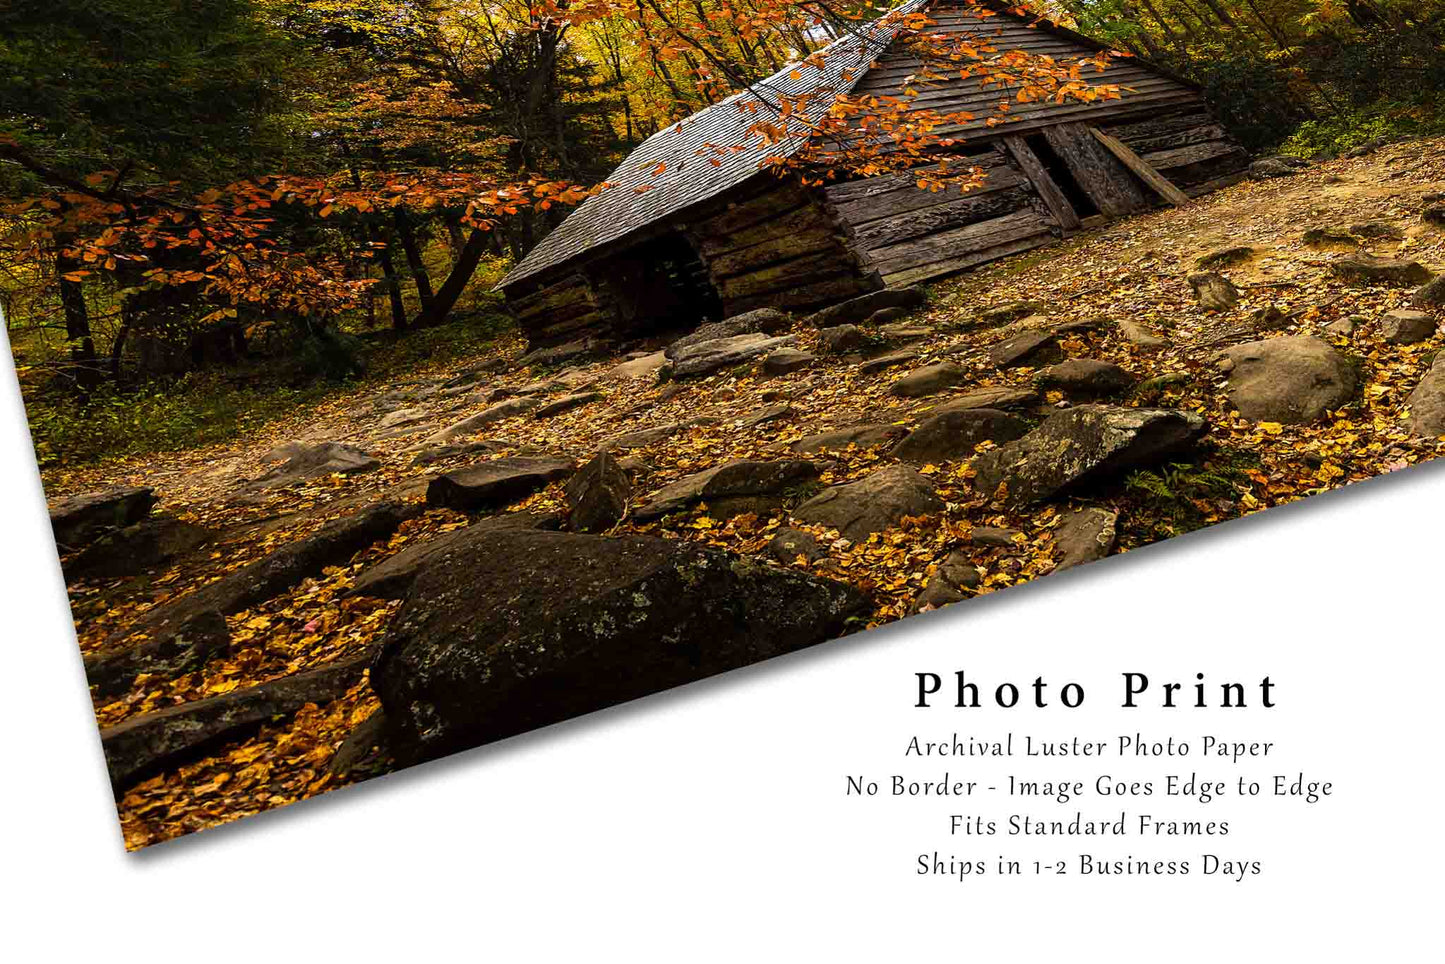 Country Photography Print (Not Framed) Picture of Old Barn Surrounded by Fall Foliage on Autumn Day in Tennessee Great Smoky Mountains Wall Art Rustic Decor